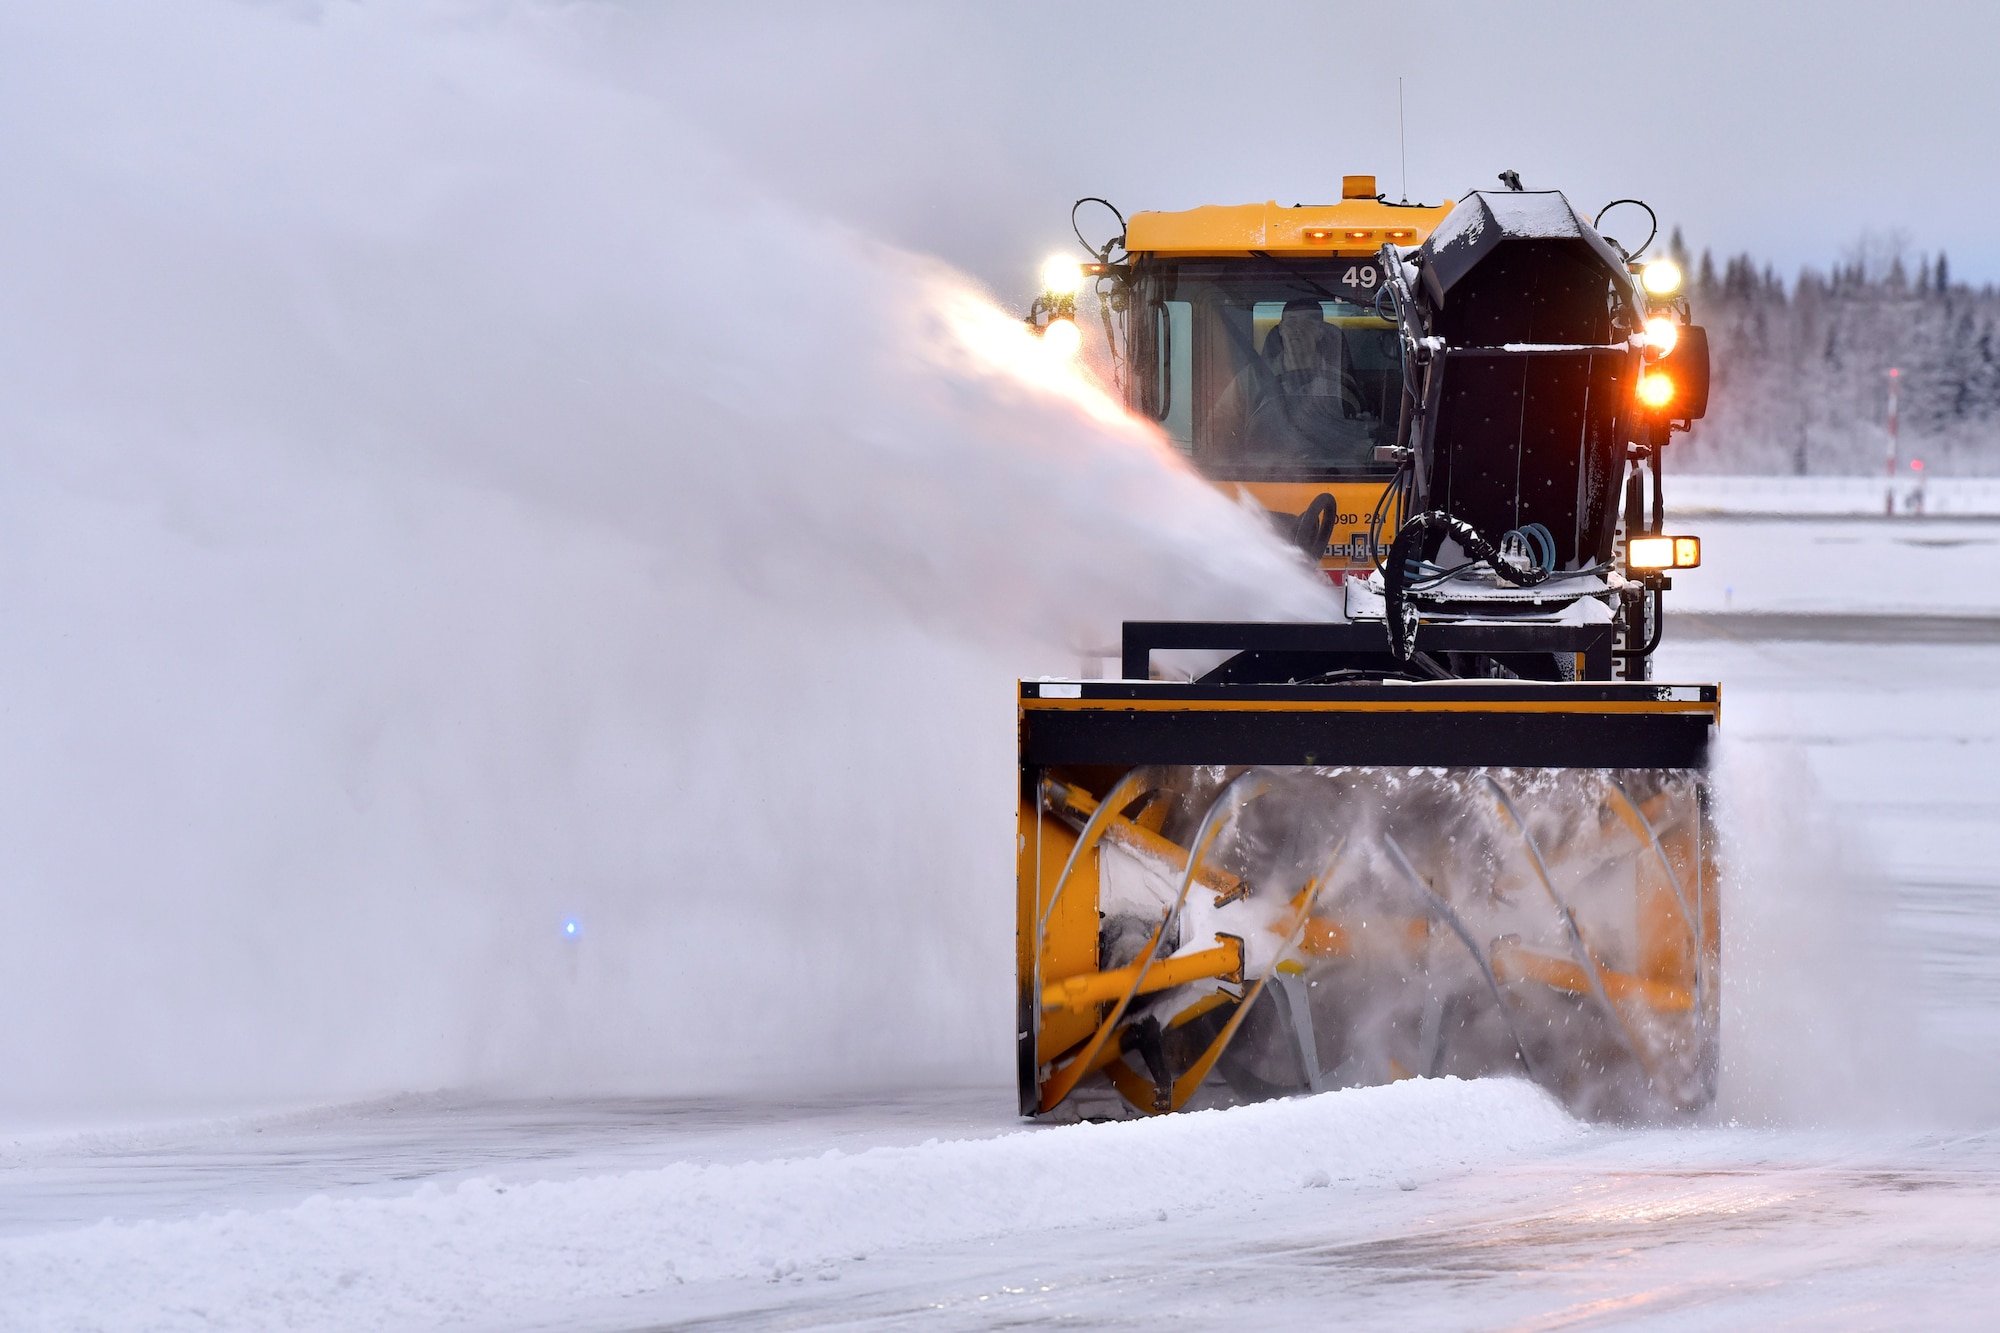 A 354th Civil Engineer Squadron pavements and construction equipment operator removes snow from the flight line at Eielson Air Force Base, Alaska, Nov. 26, 2019.  The runway at Eielson is always active, and therefore must remain free of debris at all times. (U.S. Air Force photo by Senior Airman Beaux Hebert)